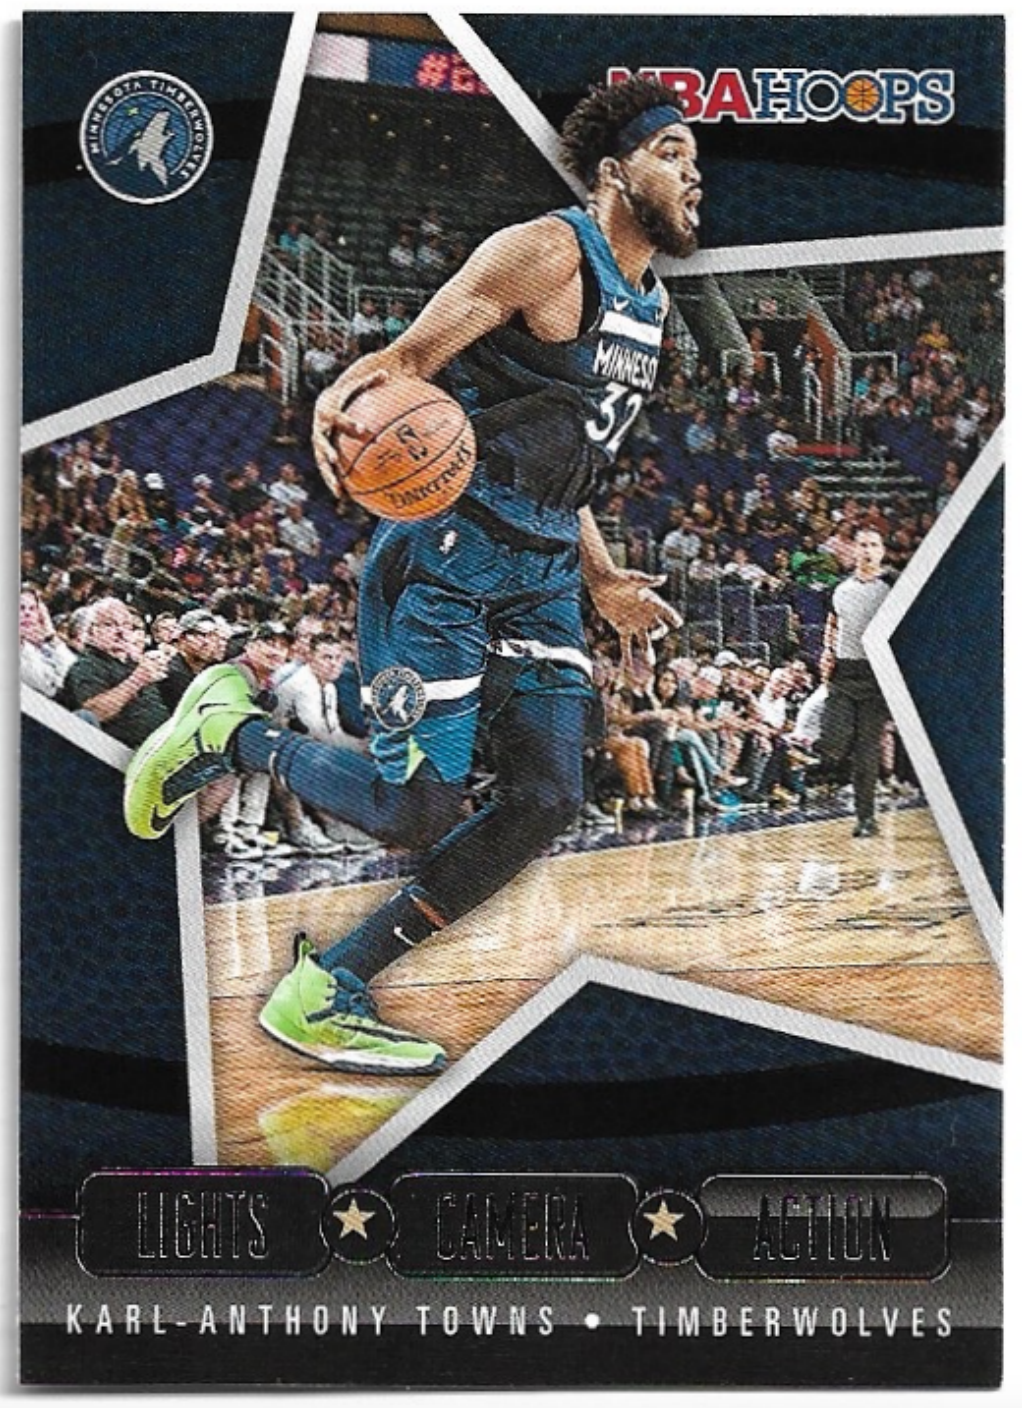 Lights Camera Action KARL-ANTHONY TOWNS 20-21 Panini Hoops Basketball